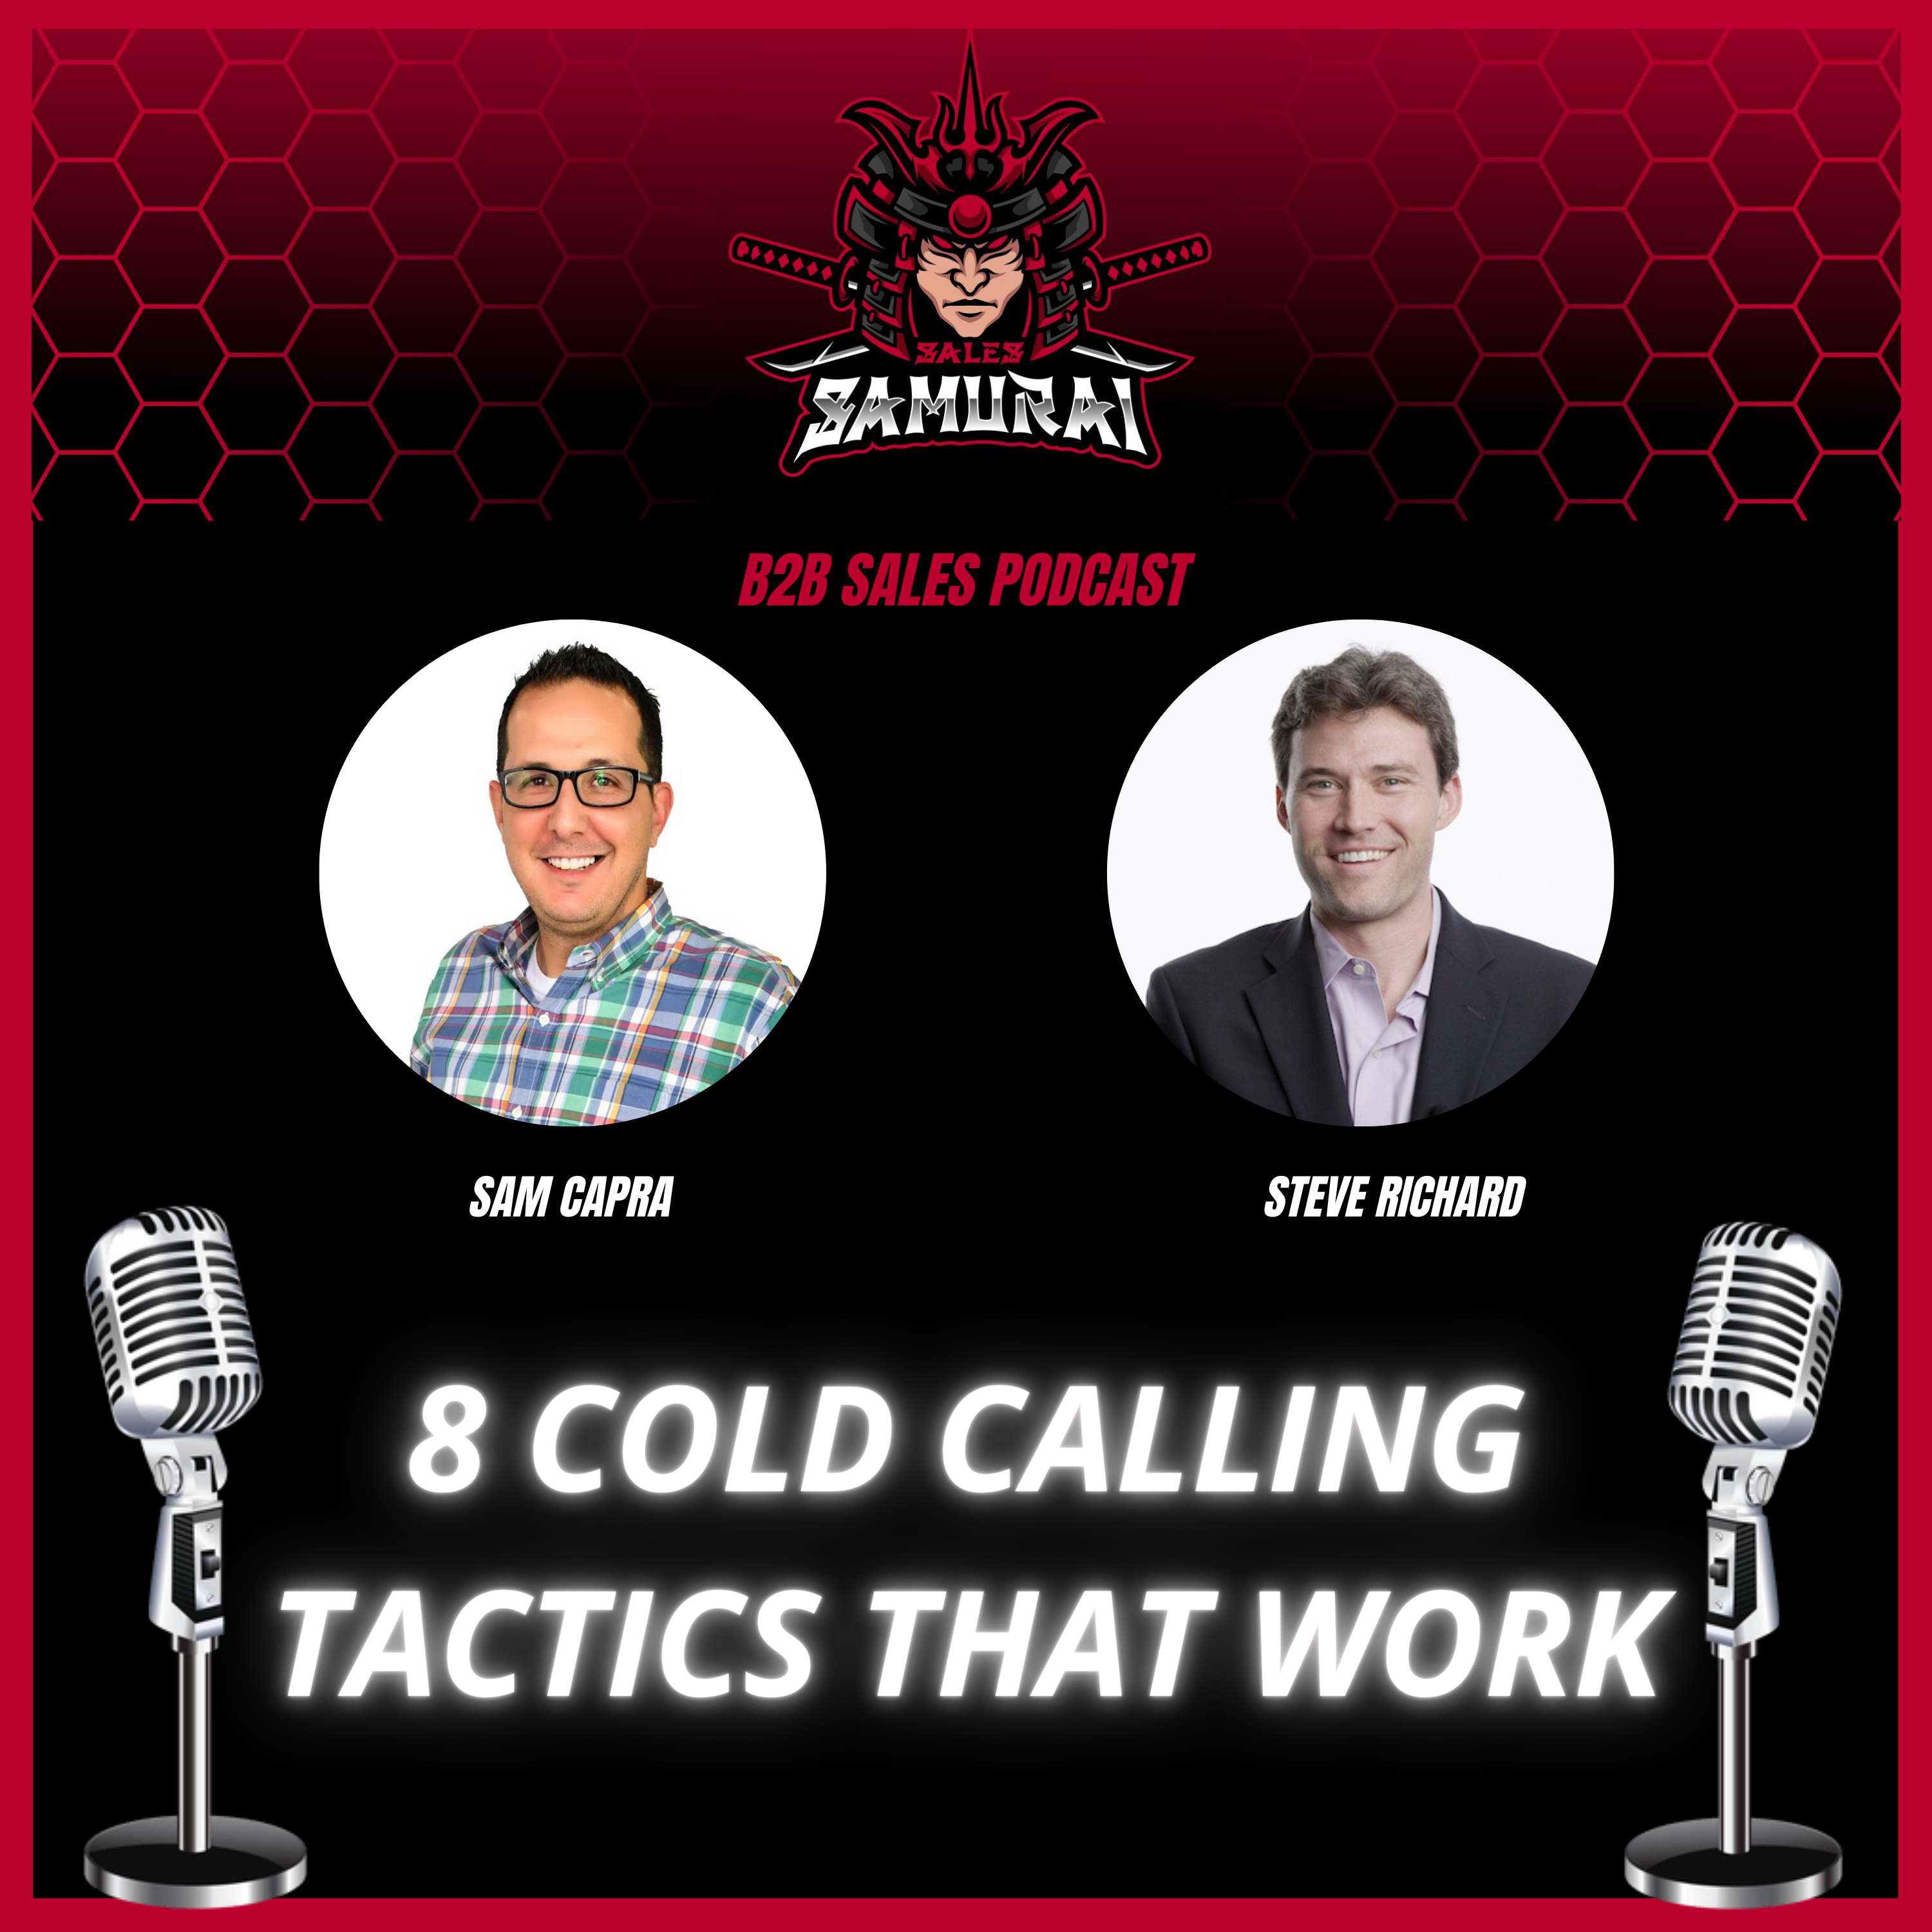 8 cold calling tactics that work Image